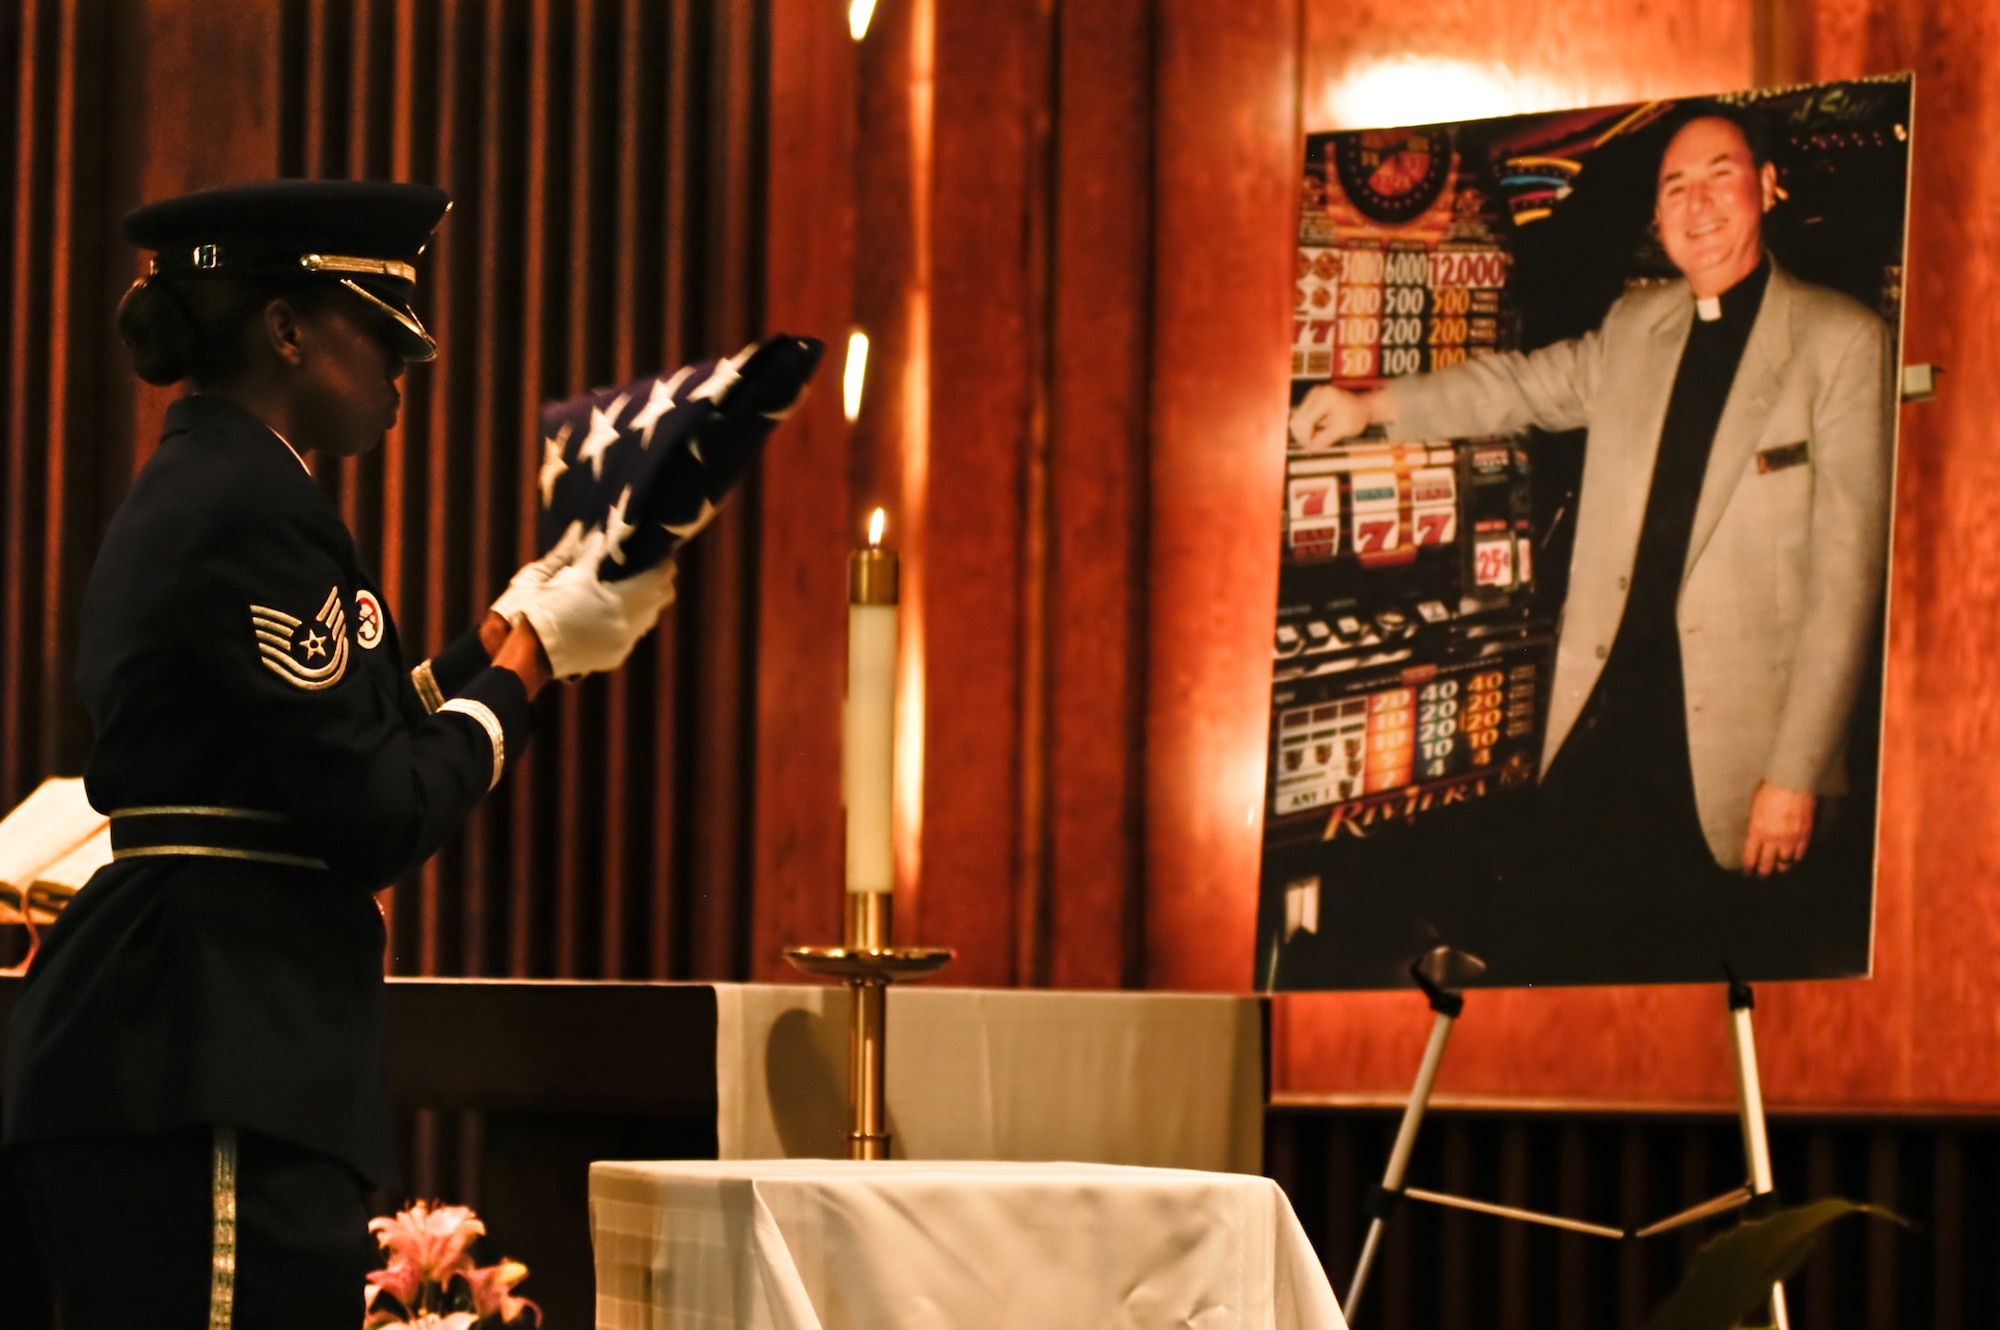 ROBINS AIR FORCE BASE, Ga. -- Tech. Sgt. Tiffany Jackson, Robins AFB Honor Guard flight sergeant, places a flag in front of a photo of Chaplain (Col.) Charles M. Bolin during his memorial service Oct. 14, 2010 in the base chapel. Chaplain Bolin was serving with the Yellow Ribbon Campaign at Air Force Reserve Command headquarters. He suffered a heart attack Sept. 21 while on temporary duty at Joint Base Andrews, Md. In his civilian capacity, he was a chaplain for a major Las Vegas casino.  (U.S. Air Force photo by Staff Sgt. Alexy Saltekoff)